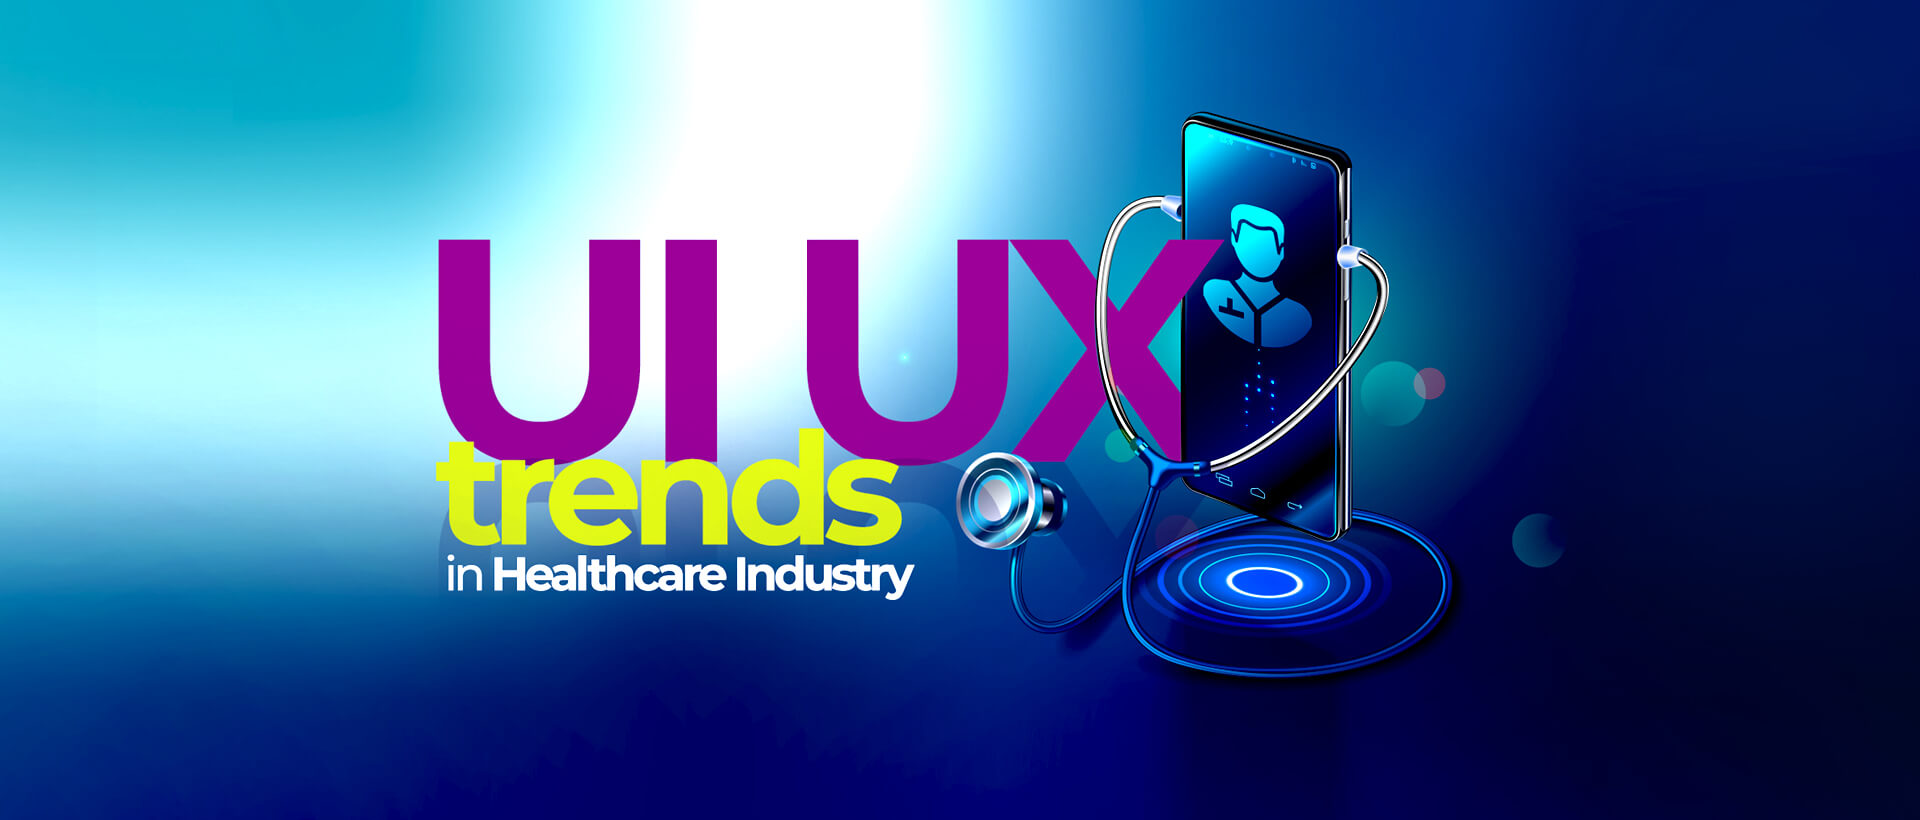 Use of UI/ UX trends in the Healthcare Industry